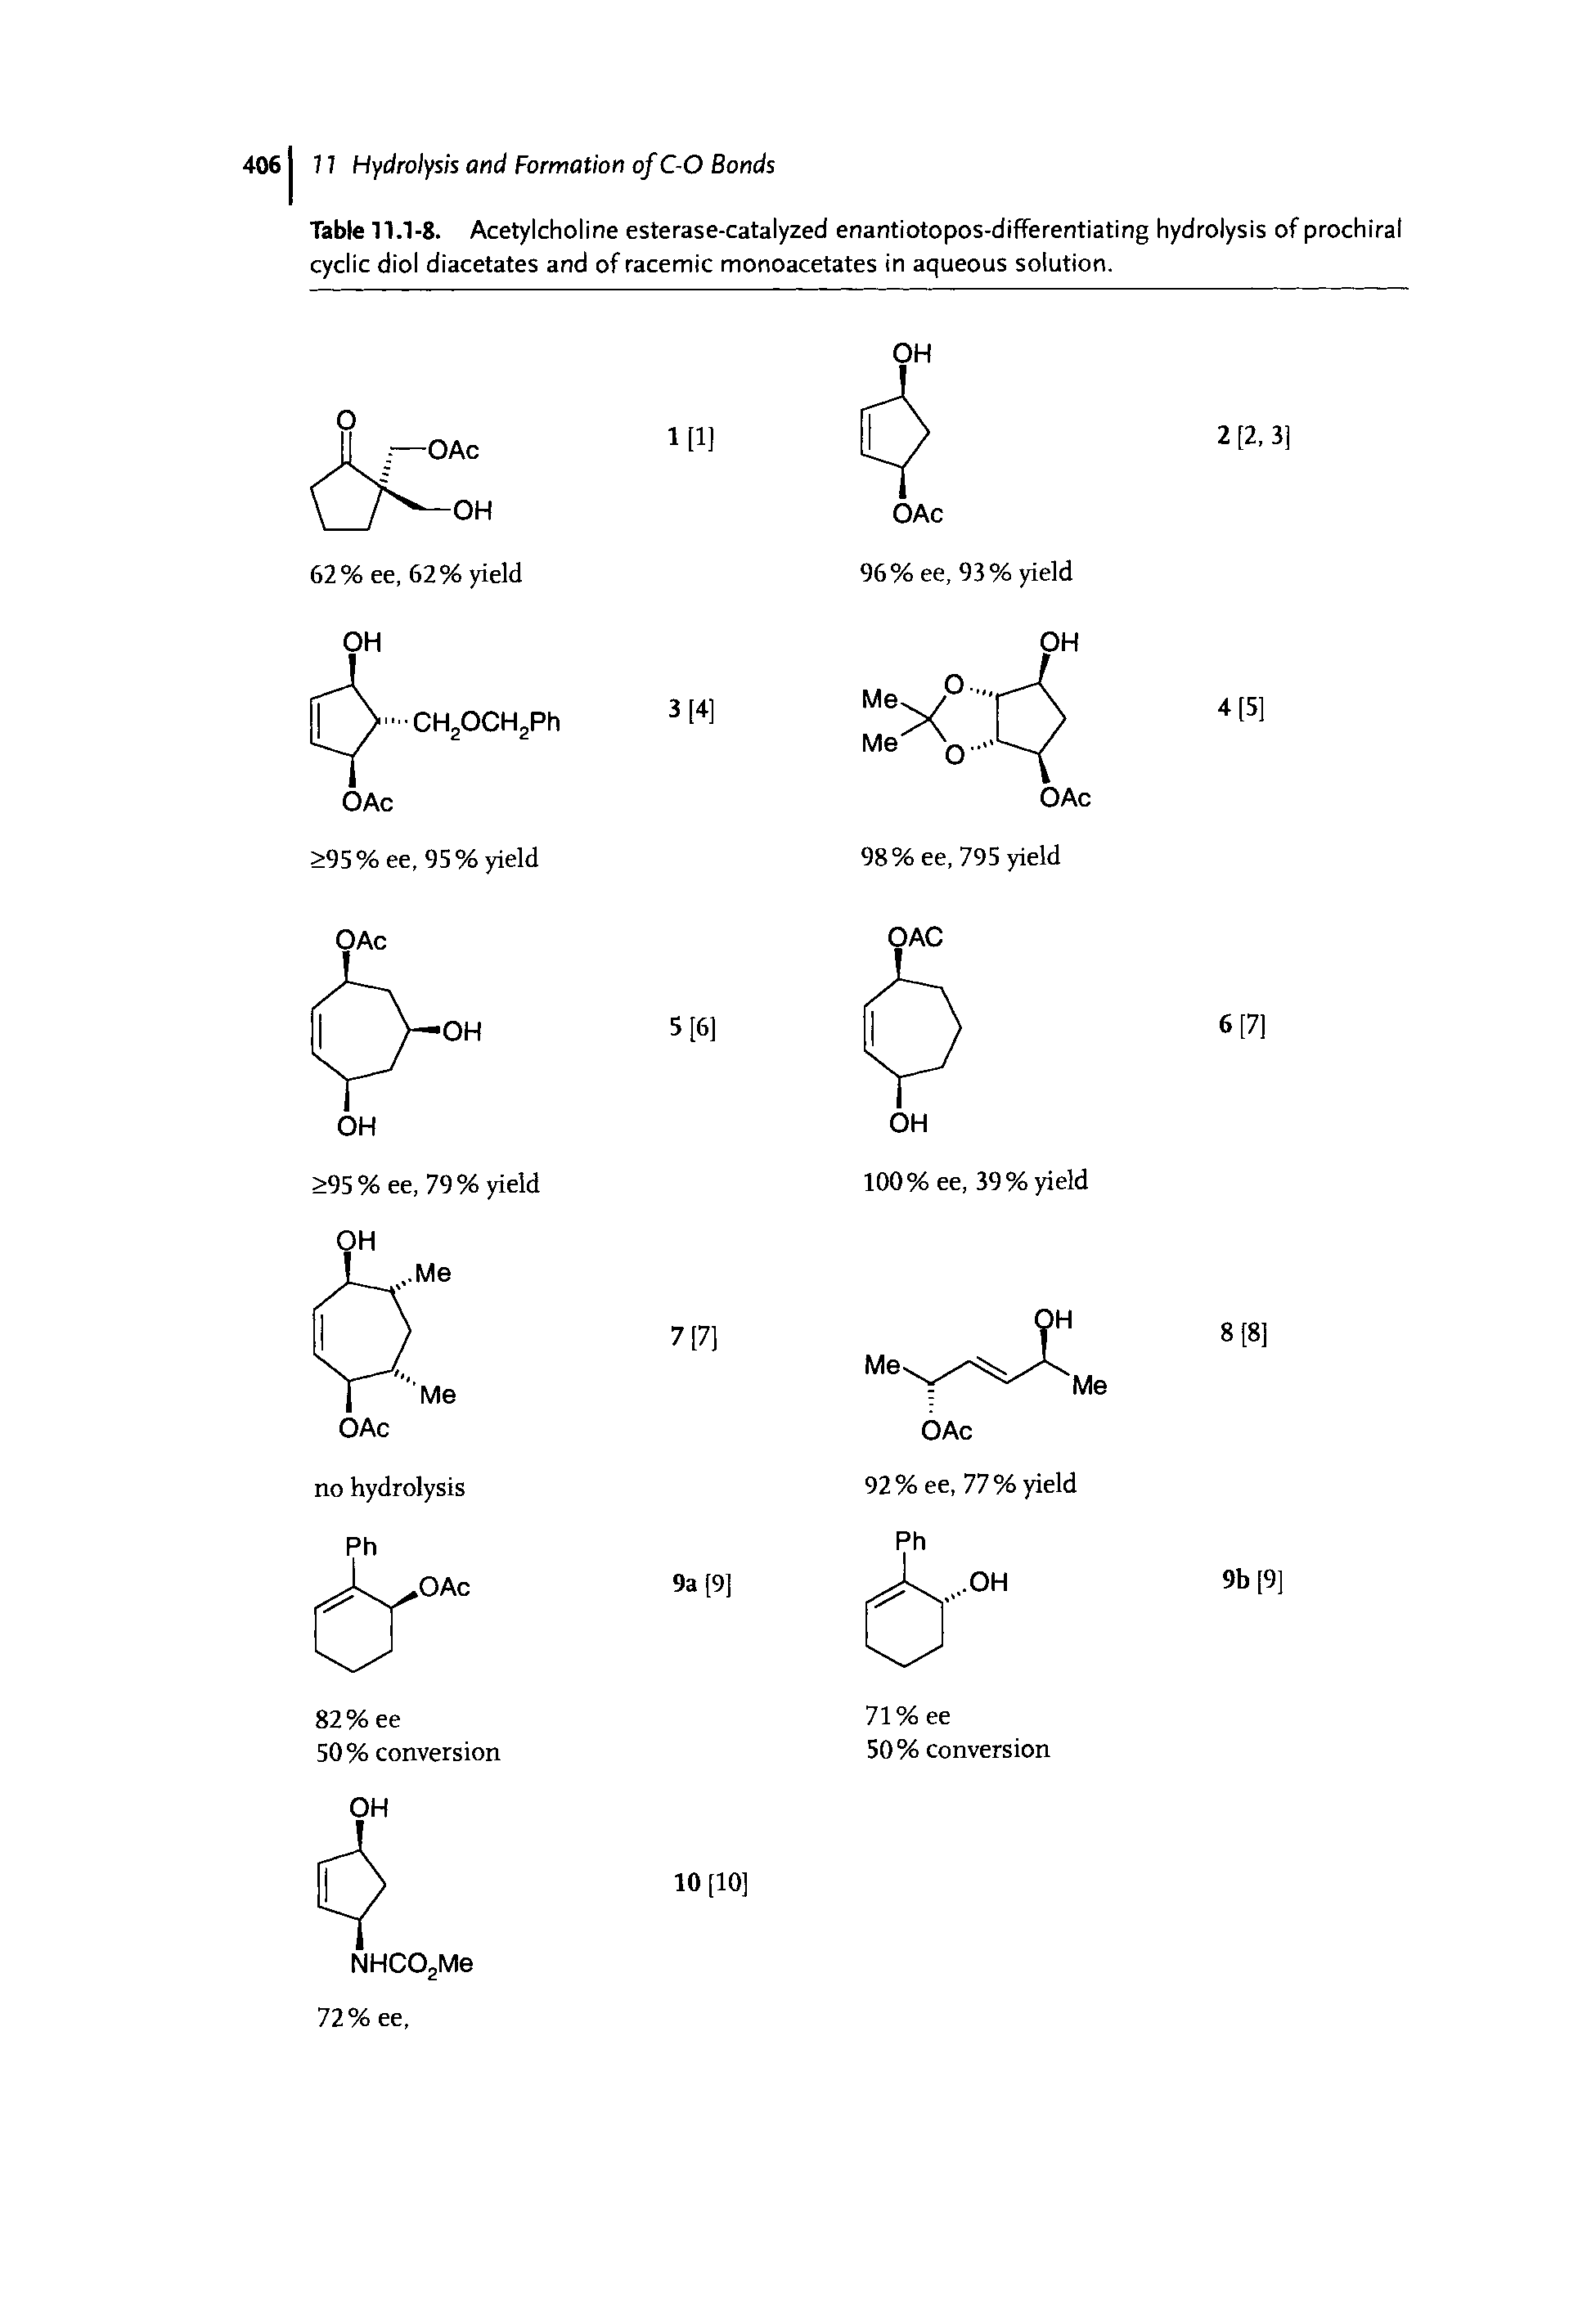 Table 11.1-8. Acetylcholine esterase-catalyzed enantiotopos-differentiating hydrolysis of prochiral cyclic diol diacetates and of racemic monoacetates in aqueous solution.